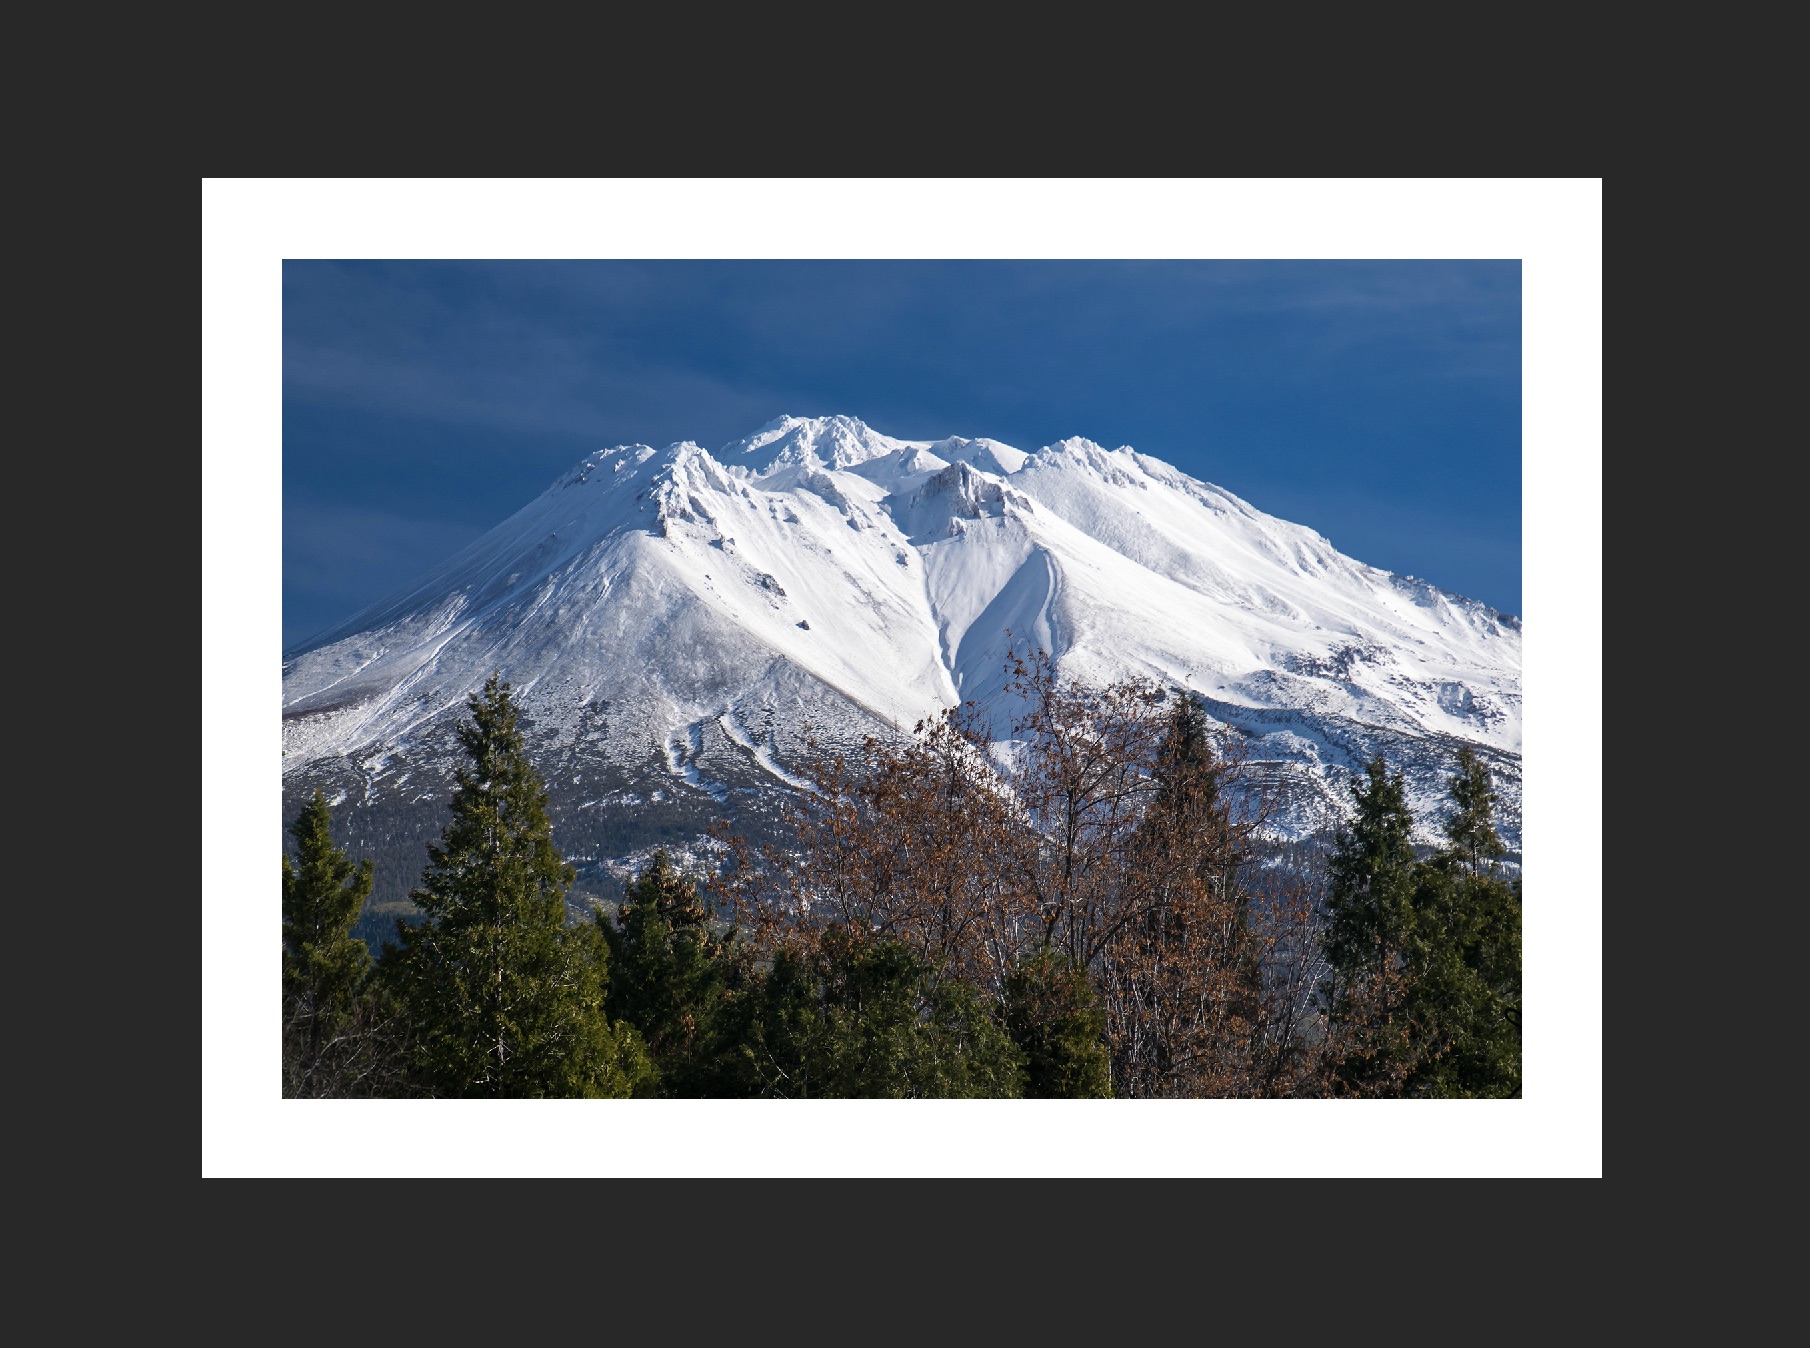 Mount Shasta just after a fresh snowfall. Shot from town of Weed, California in November. 